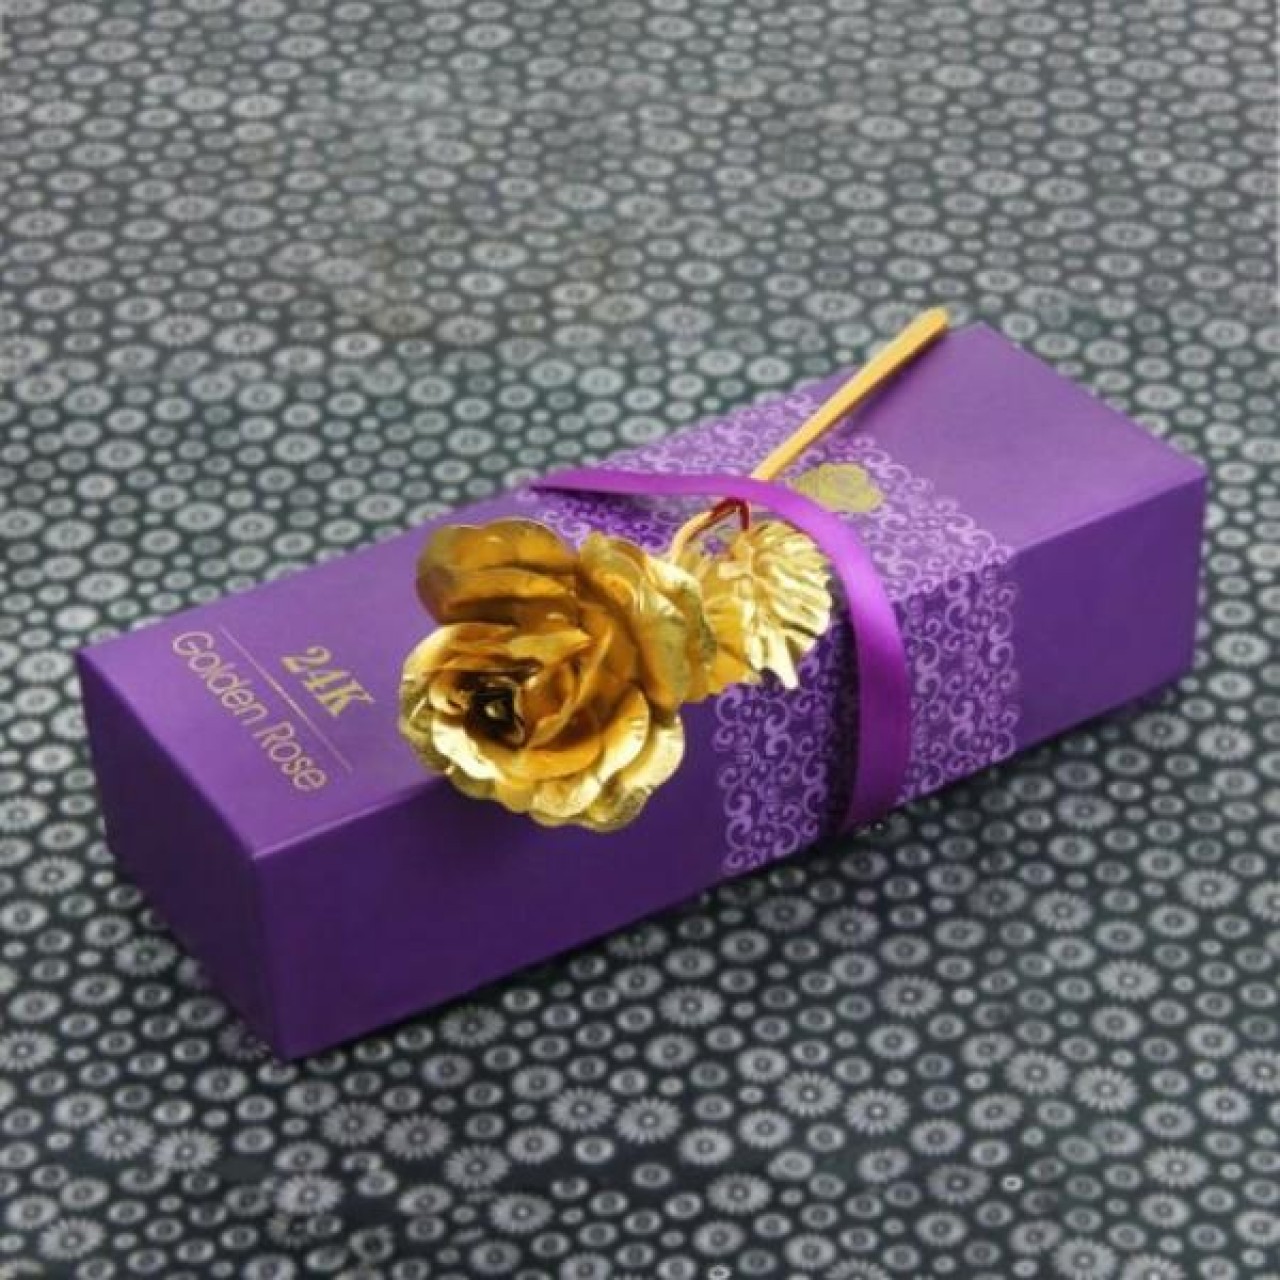 24K ARTIFICIAL GOLDEN ROSE WITH GIFT BOX